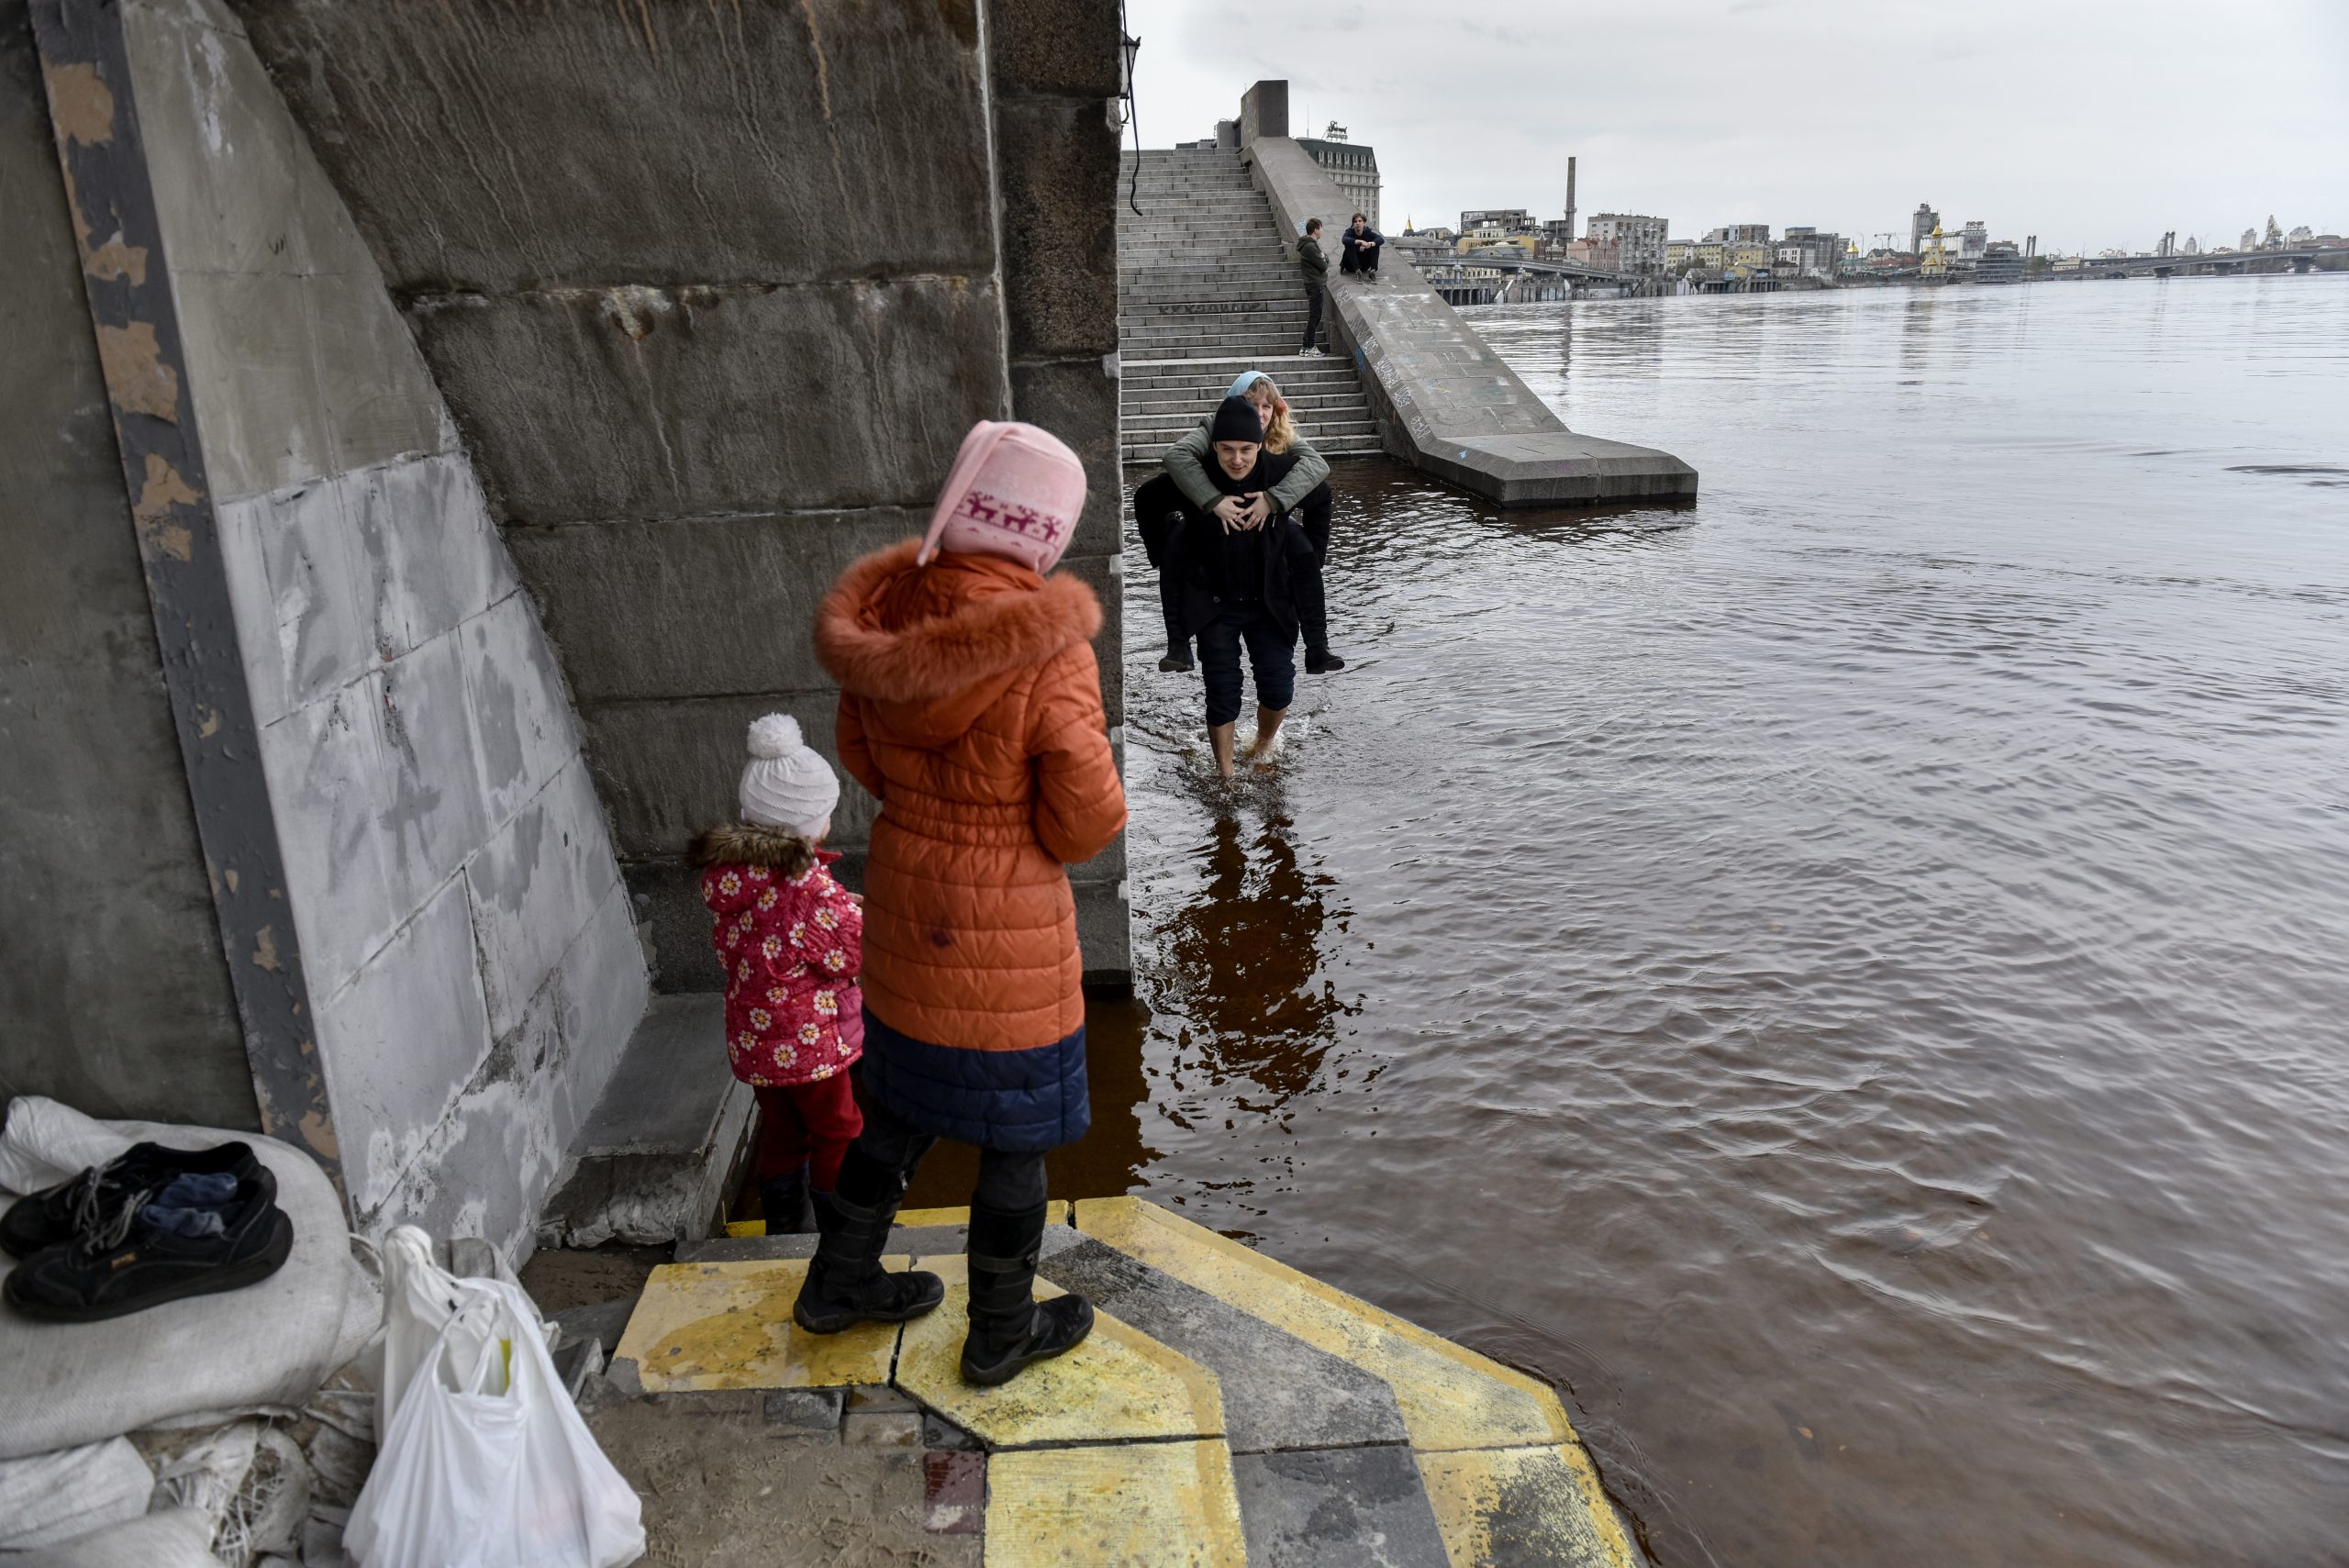 epa10584454 A man carries his wife on his back across a flooded quay amid flooding of the Dnipro River, in Kyiv (Kiev), Ukraine, 21 April 2023, as Russia's invasion of Ukraine continues. According to the Ukrainian Hydrometeorological Center of the State Emergency Service of Ukraine (SES), flood water levels in the Dnipro River within the capital have been declining for several days in a row, with no current flood emergency issued in Kyiv. This year's spring flooding affected several regions across northern and central Ukraine. Russian troops entered Ukraine on 24 February 2022, starting a conflict that has provoked destruction and a humanitarian crisis.  EPA/OLEG PETRASYUK